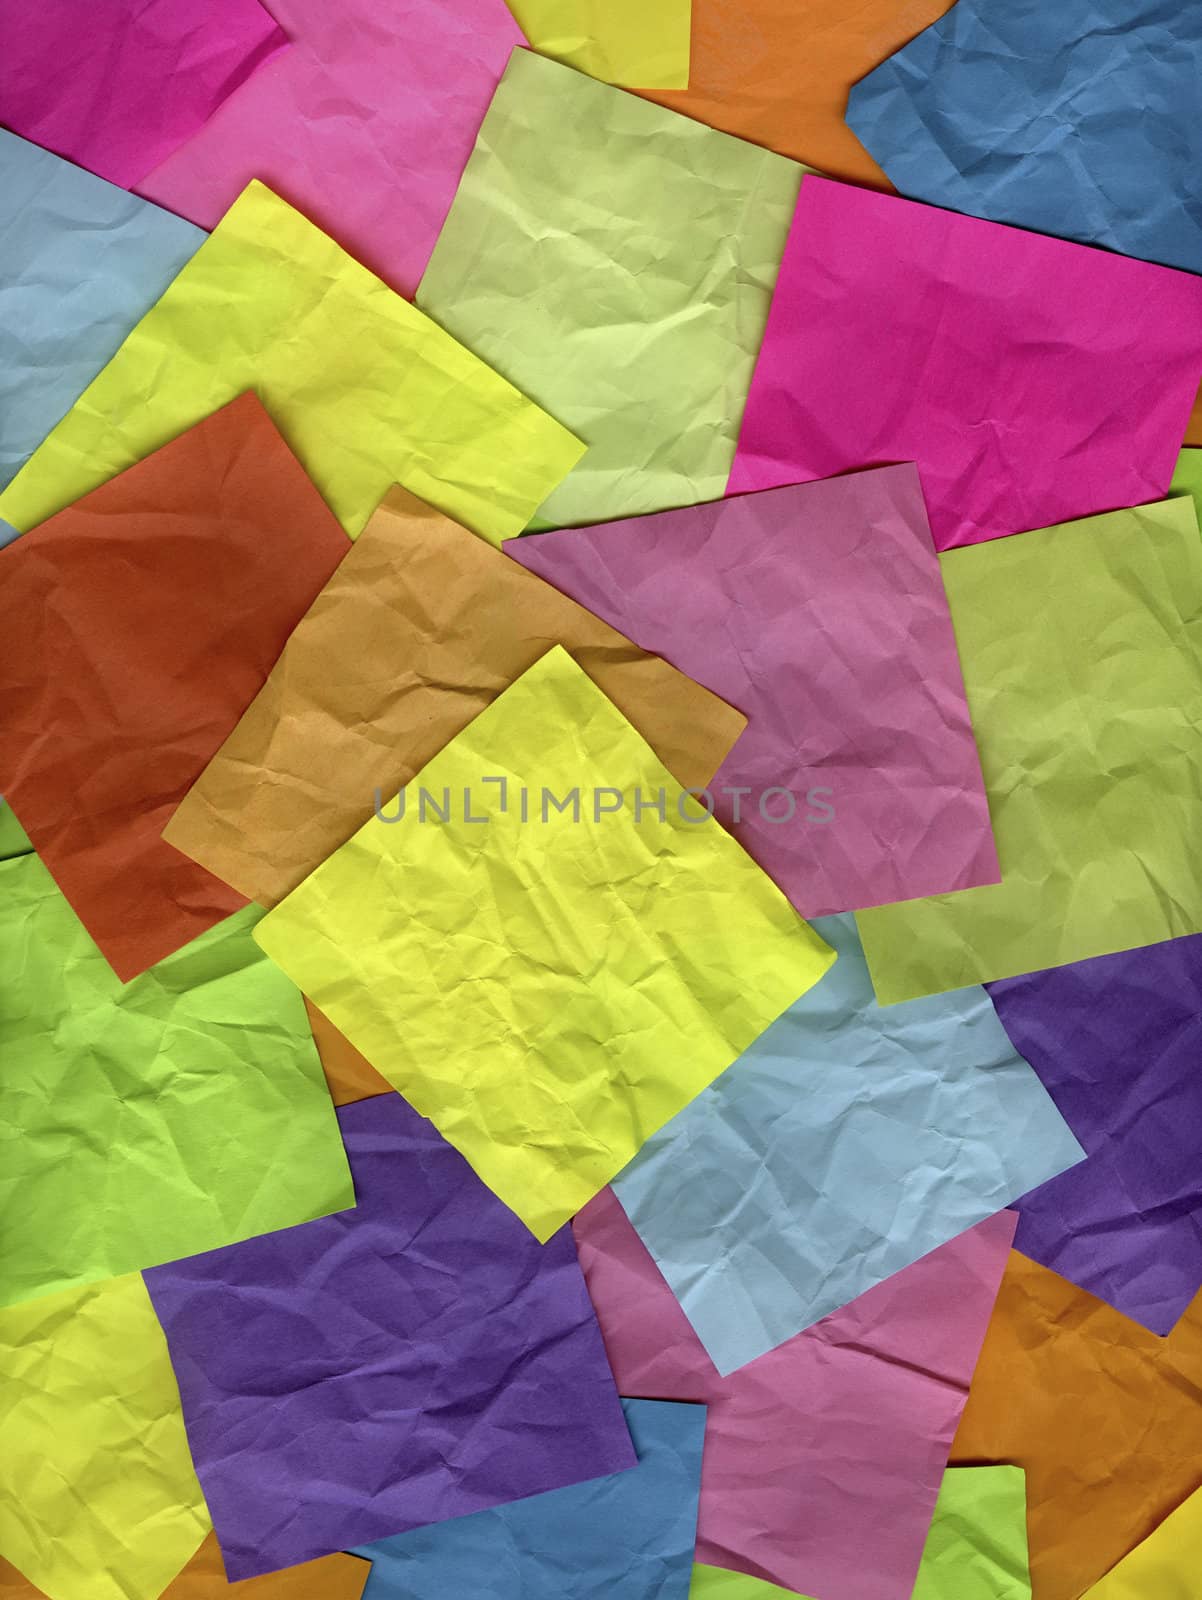 blank yellow sticky note on top of background of crumpled colorful notes